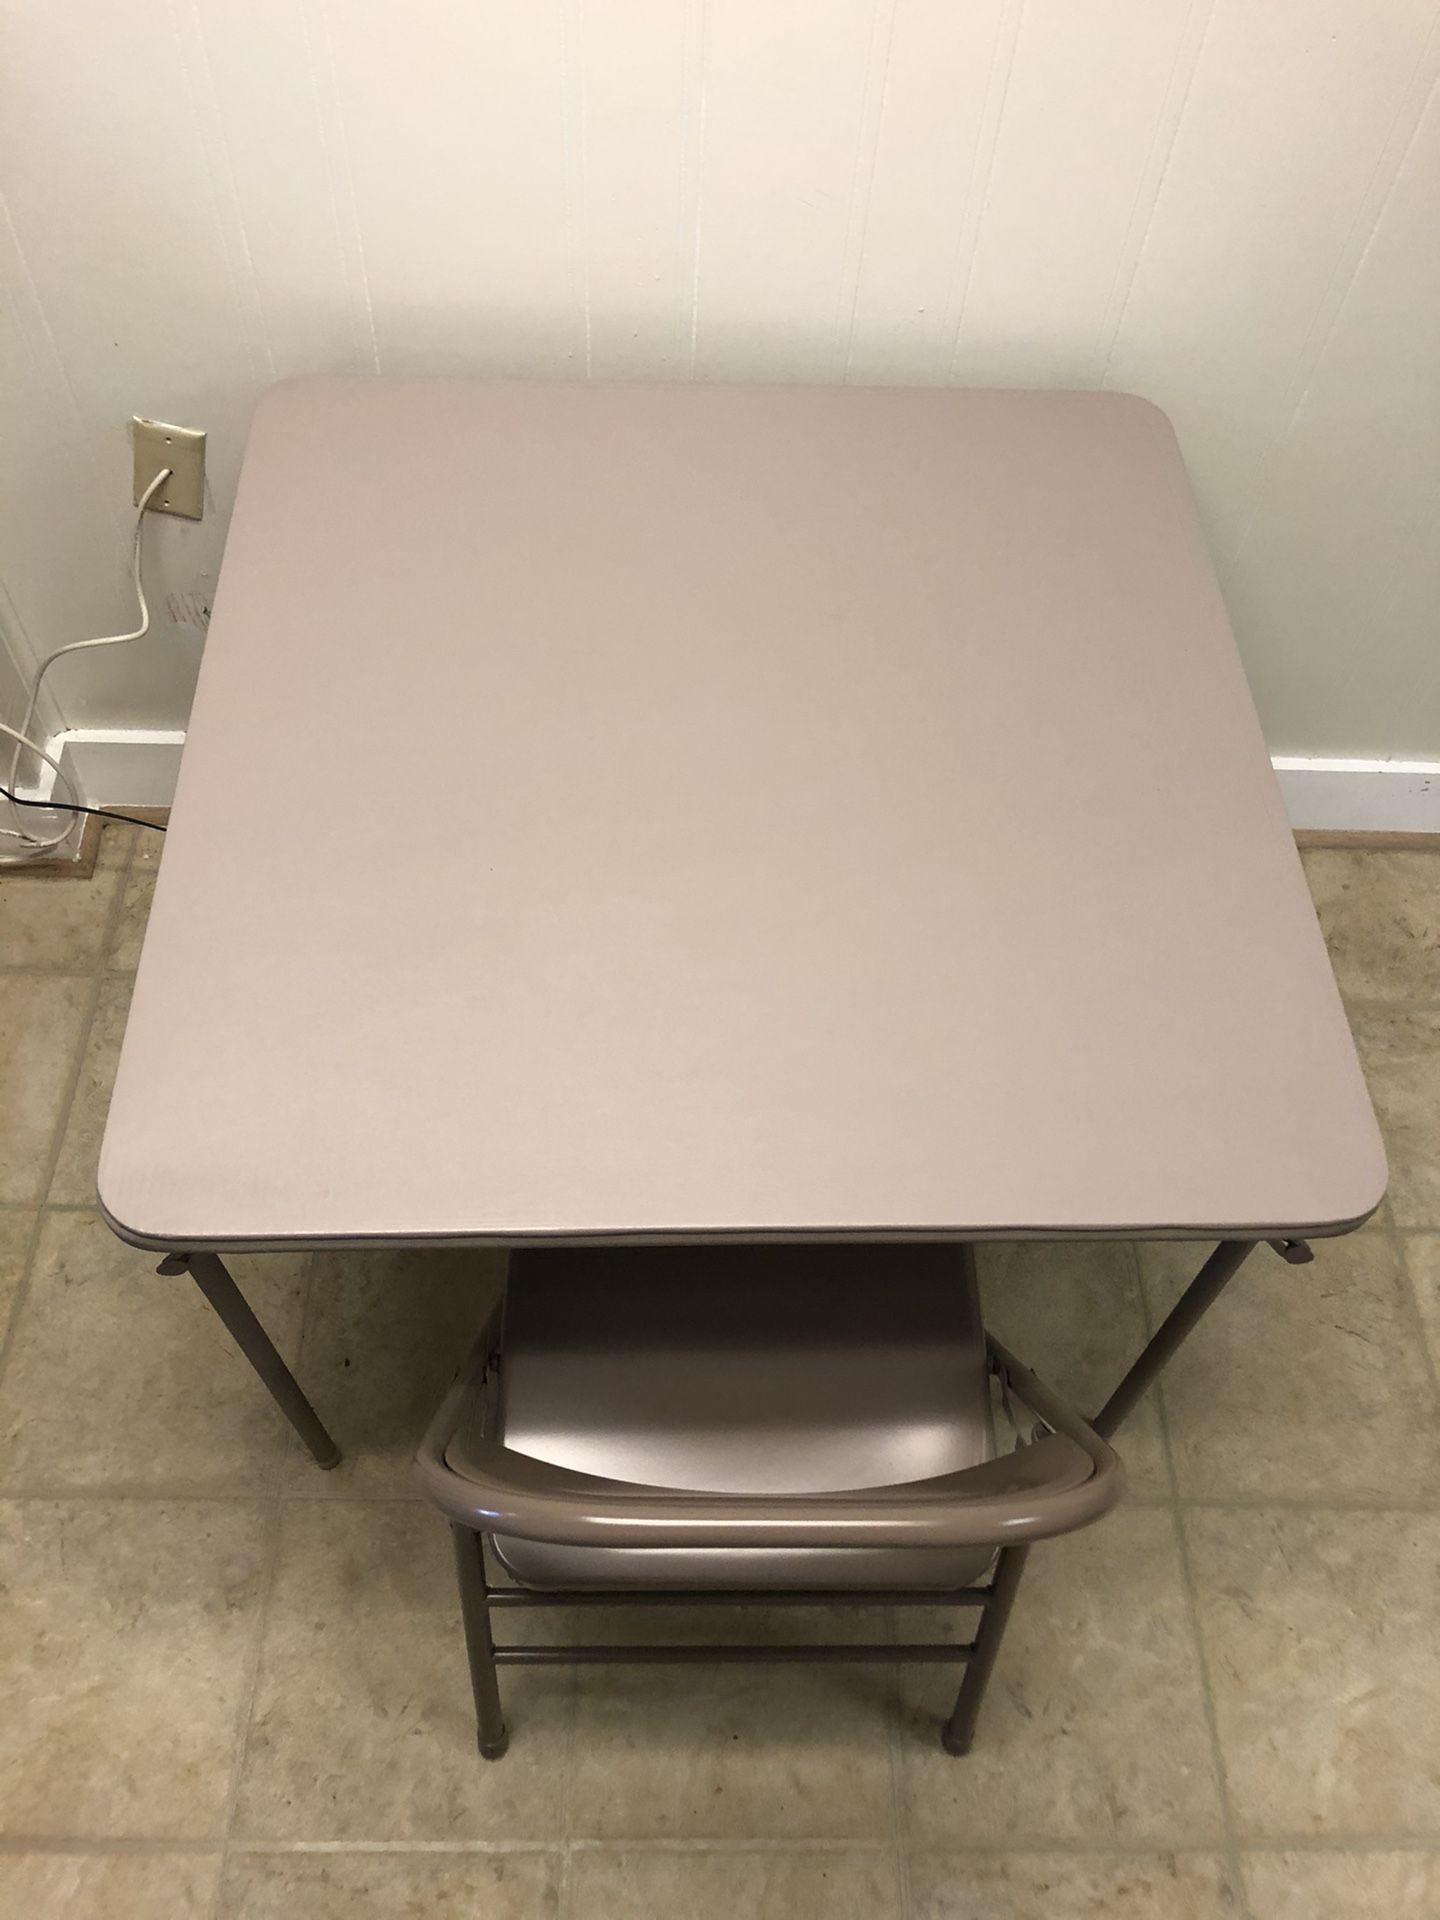 Vinyl Top Folding Card table and metal chair